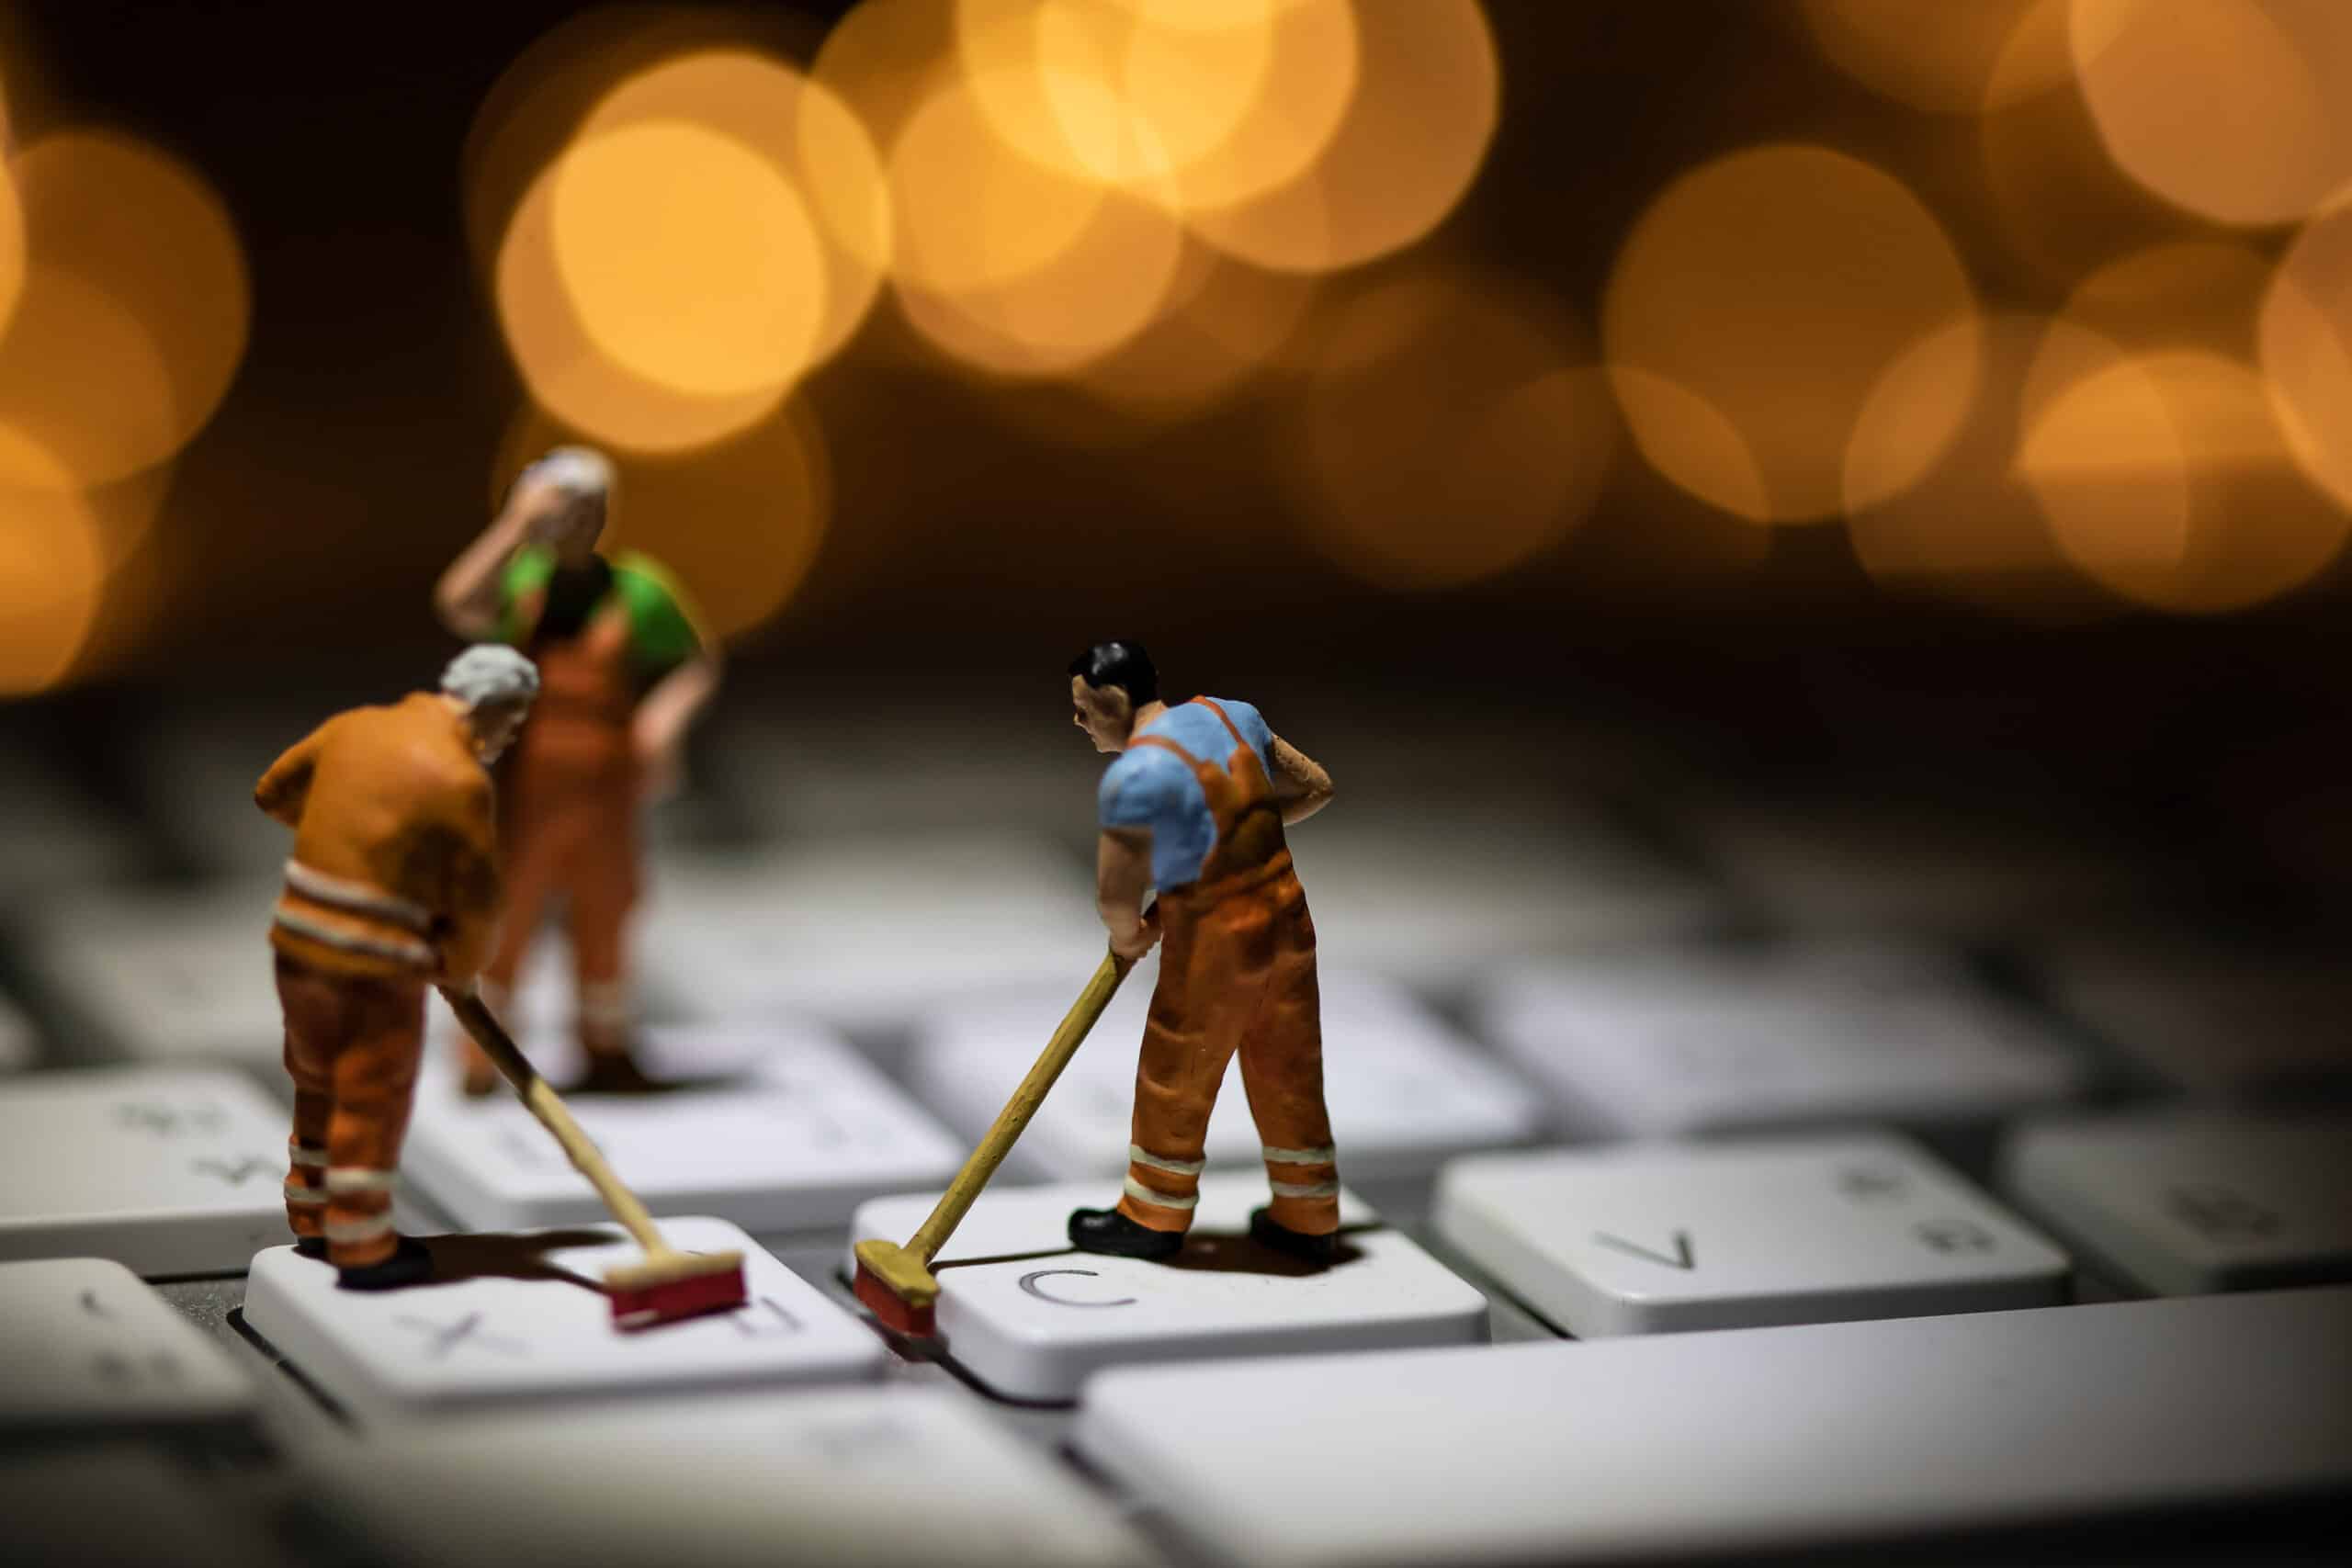 Small janitor figurines cleaning a keyboard